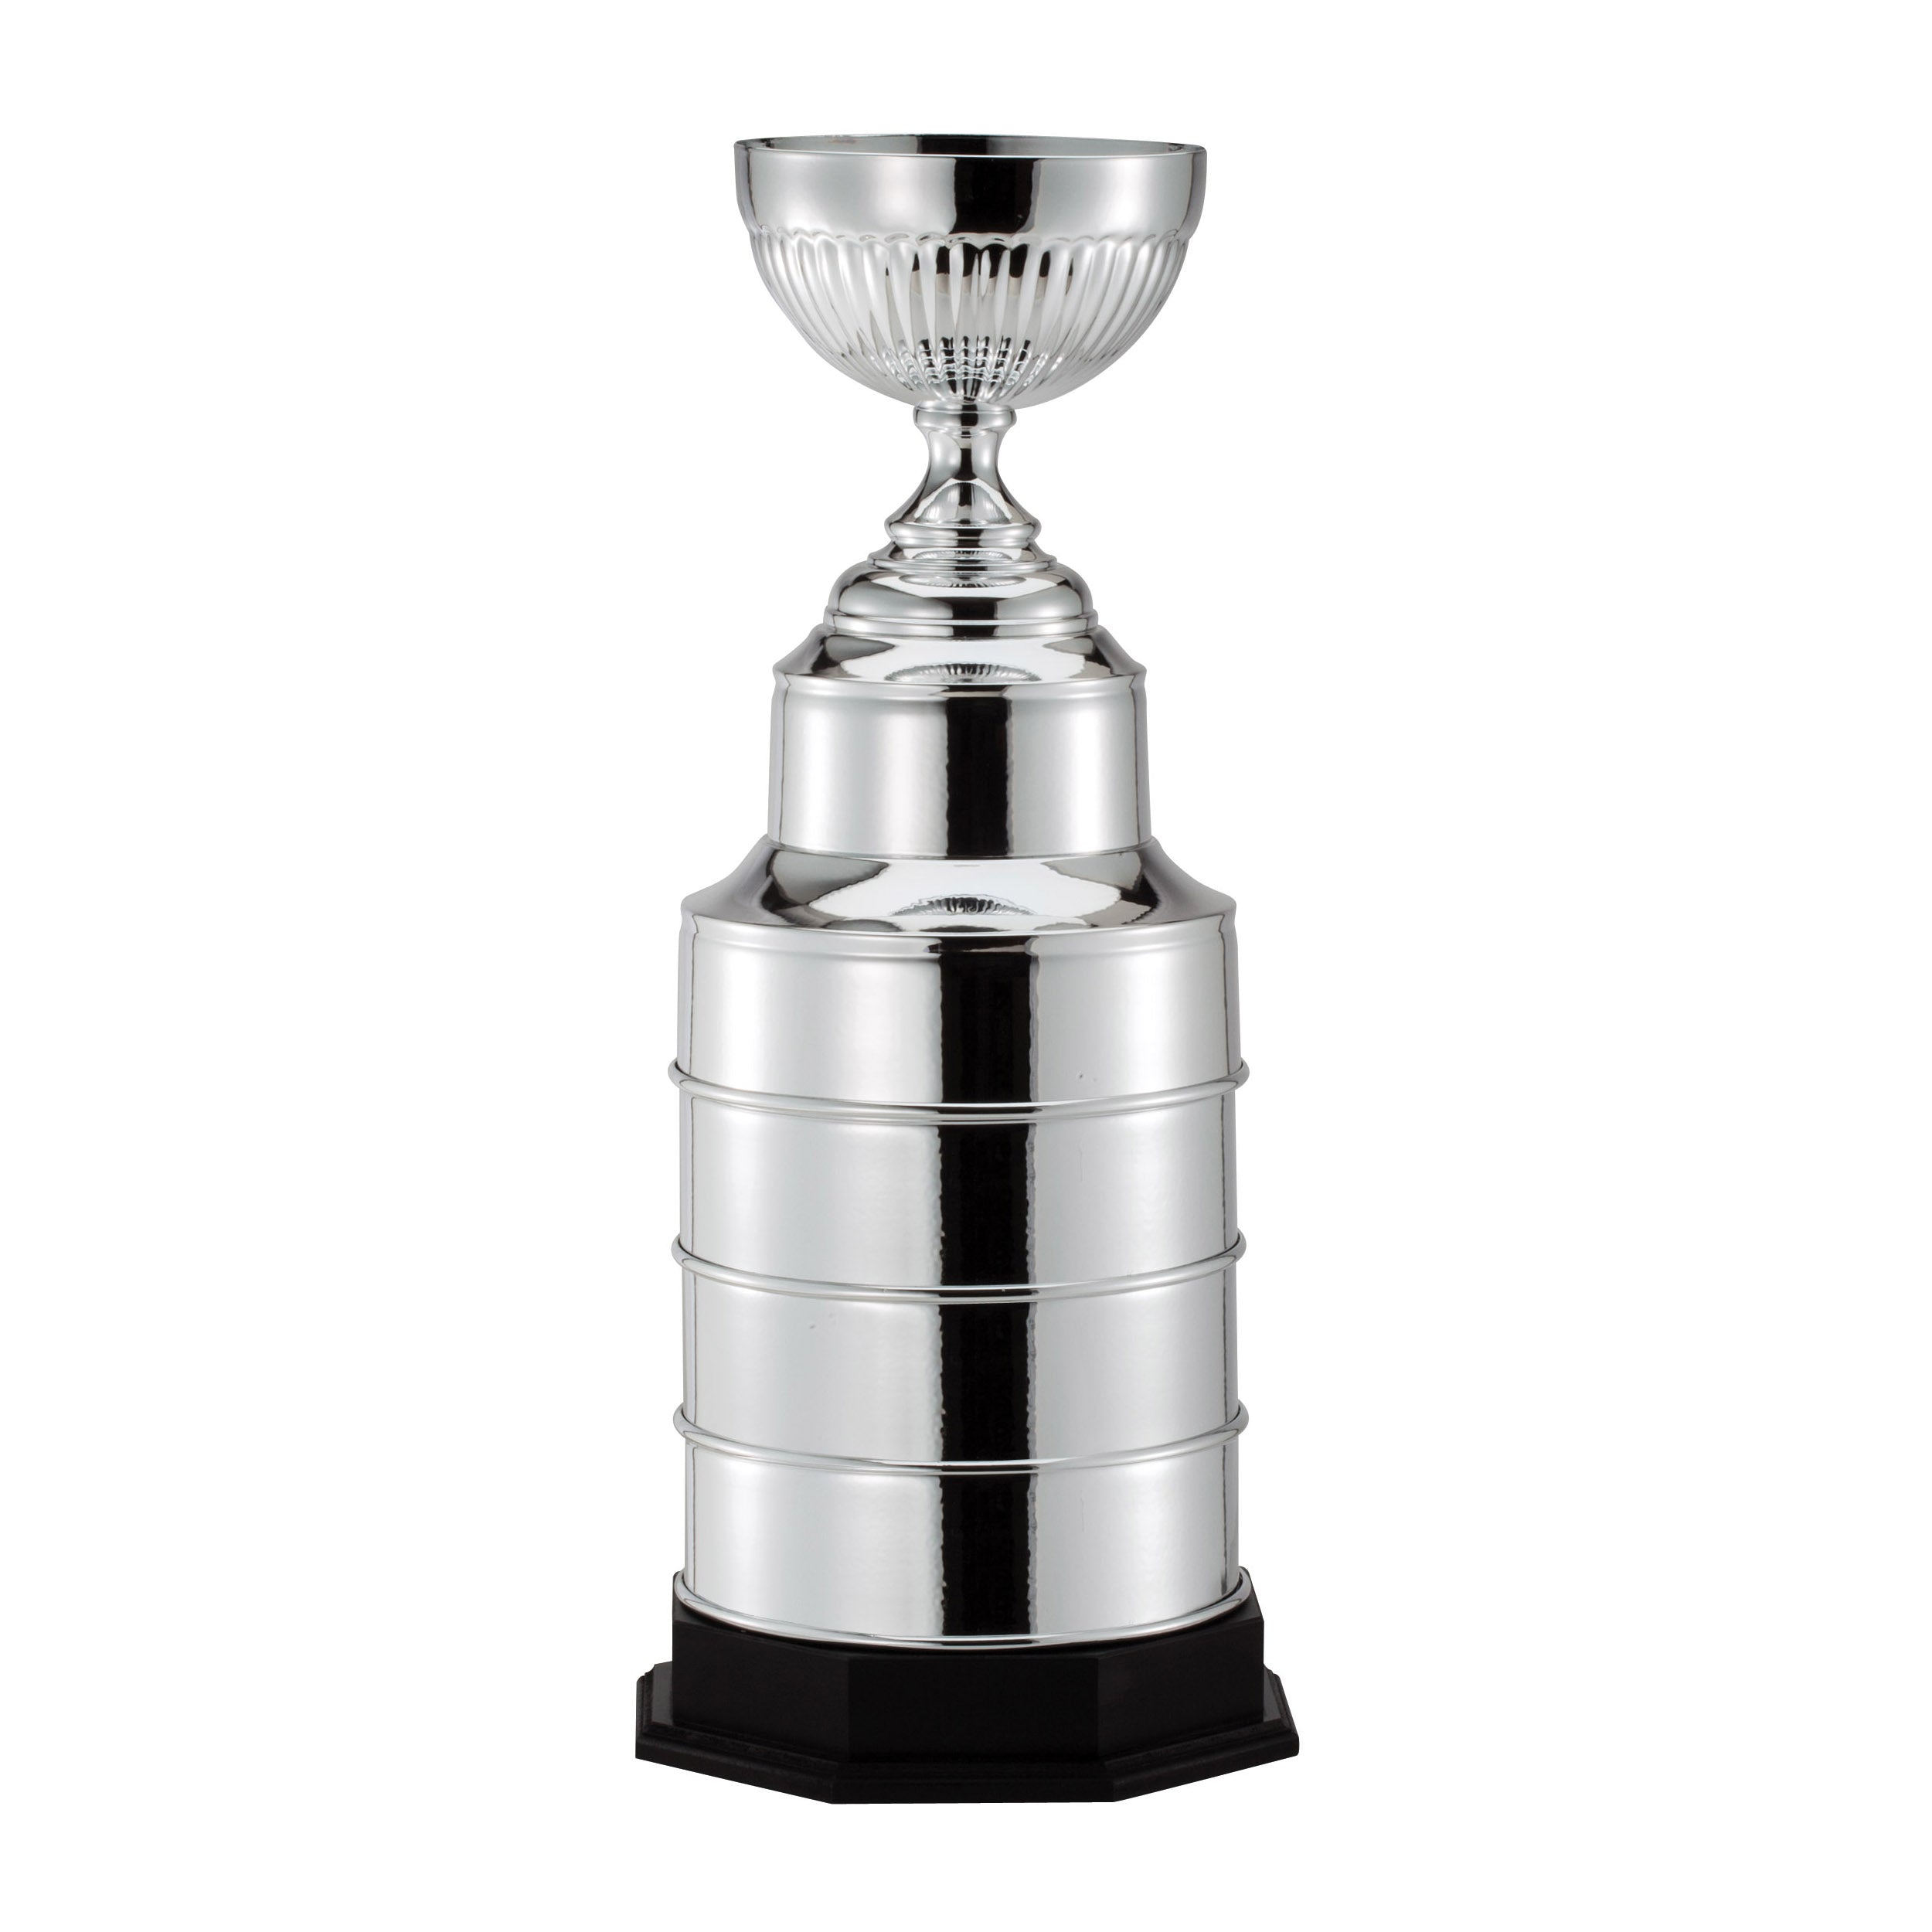 Stanley Cup Replica - Large 27"